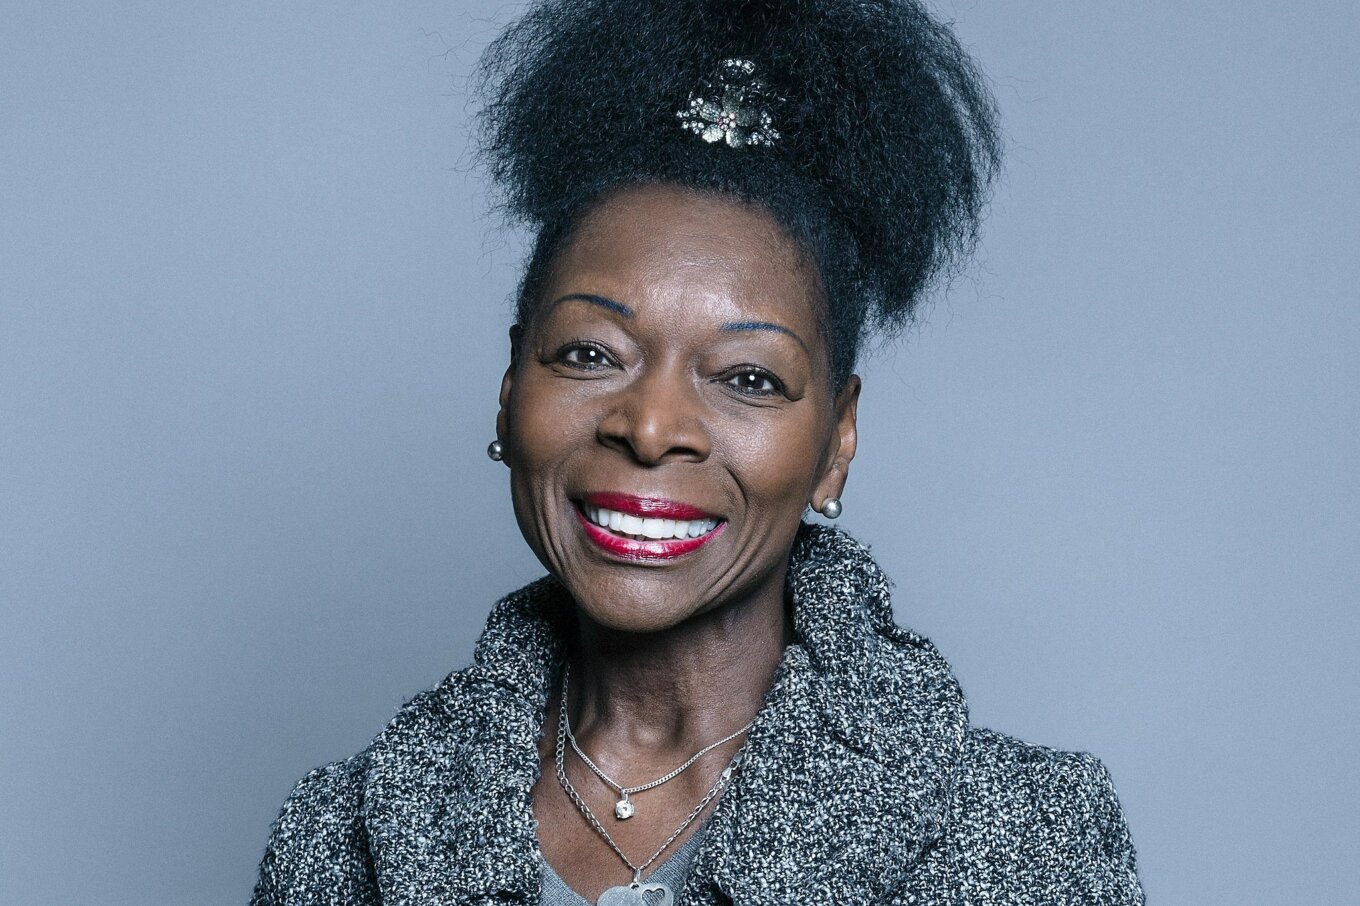 A photo of a smiling Black woman